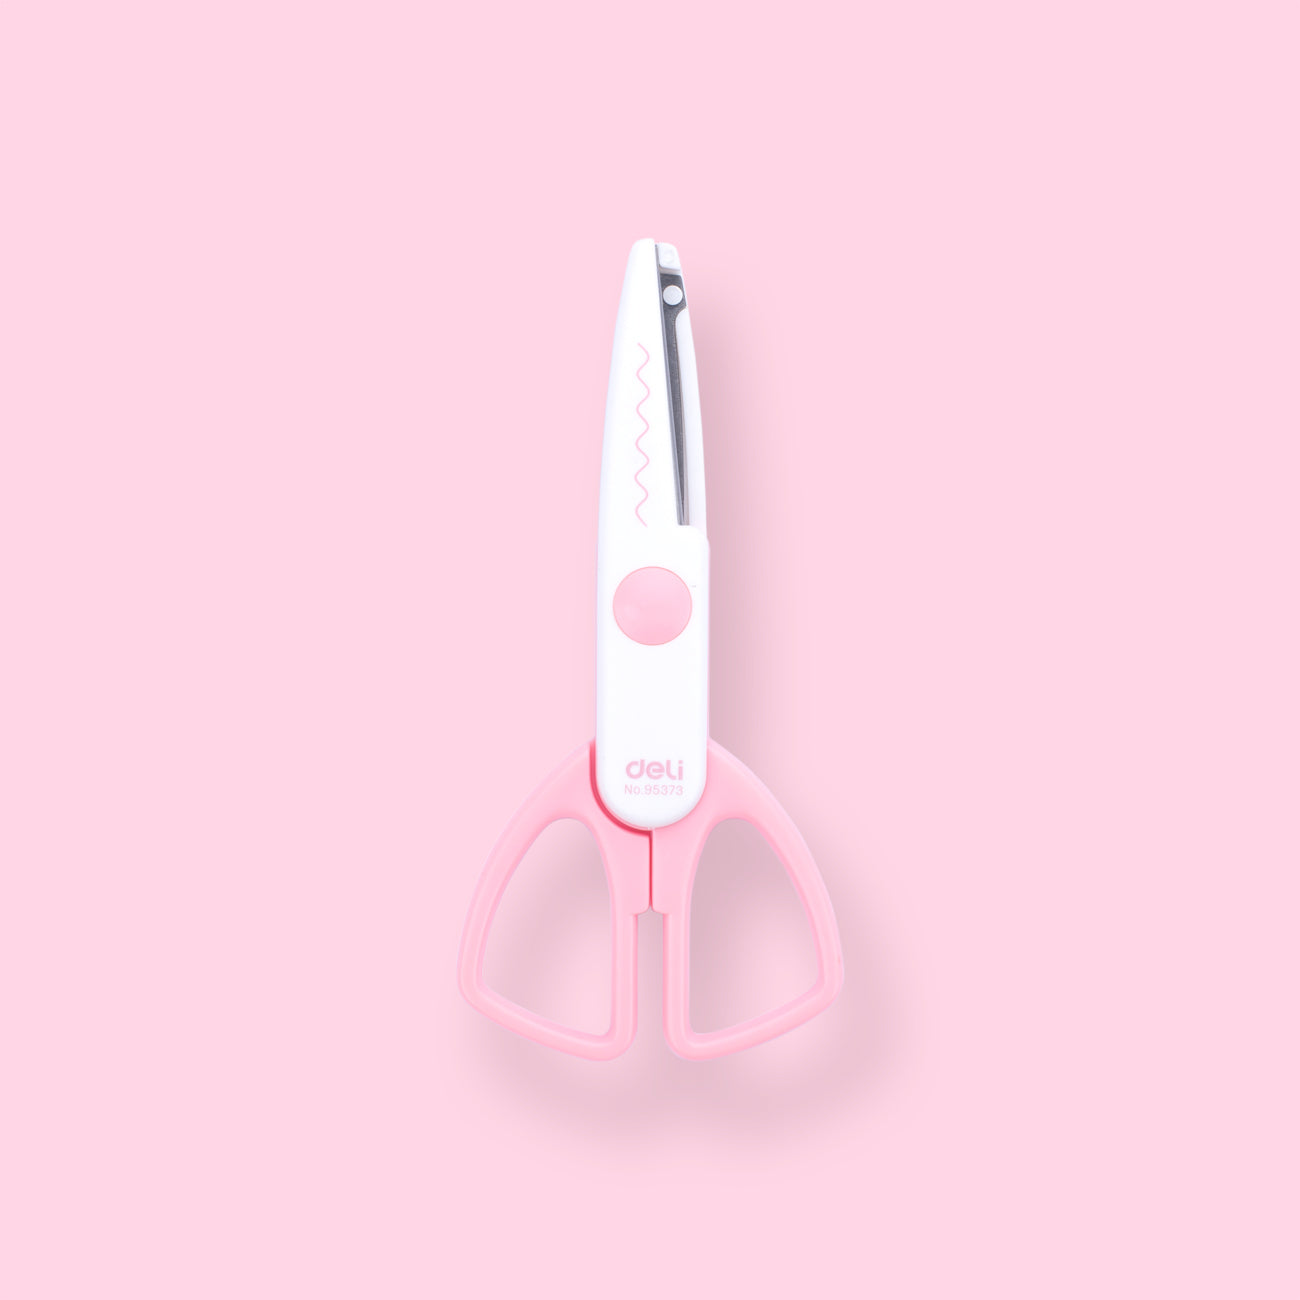 Stainless Wave Pattern Scissors - Pink